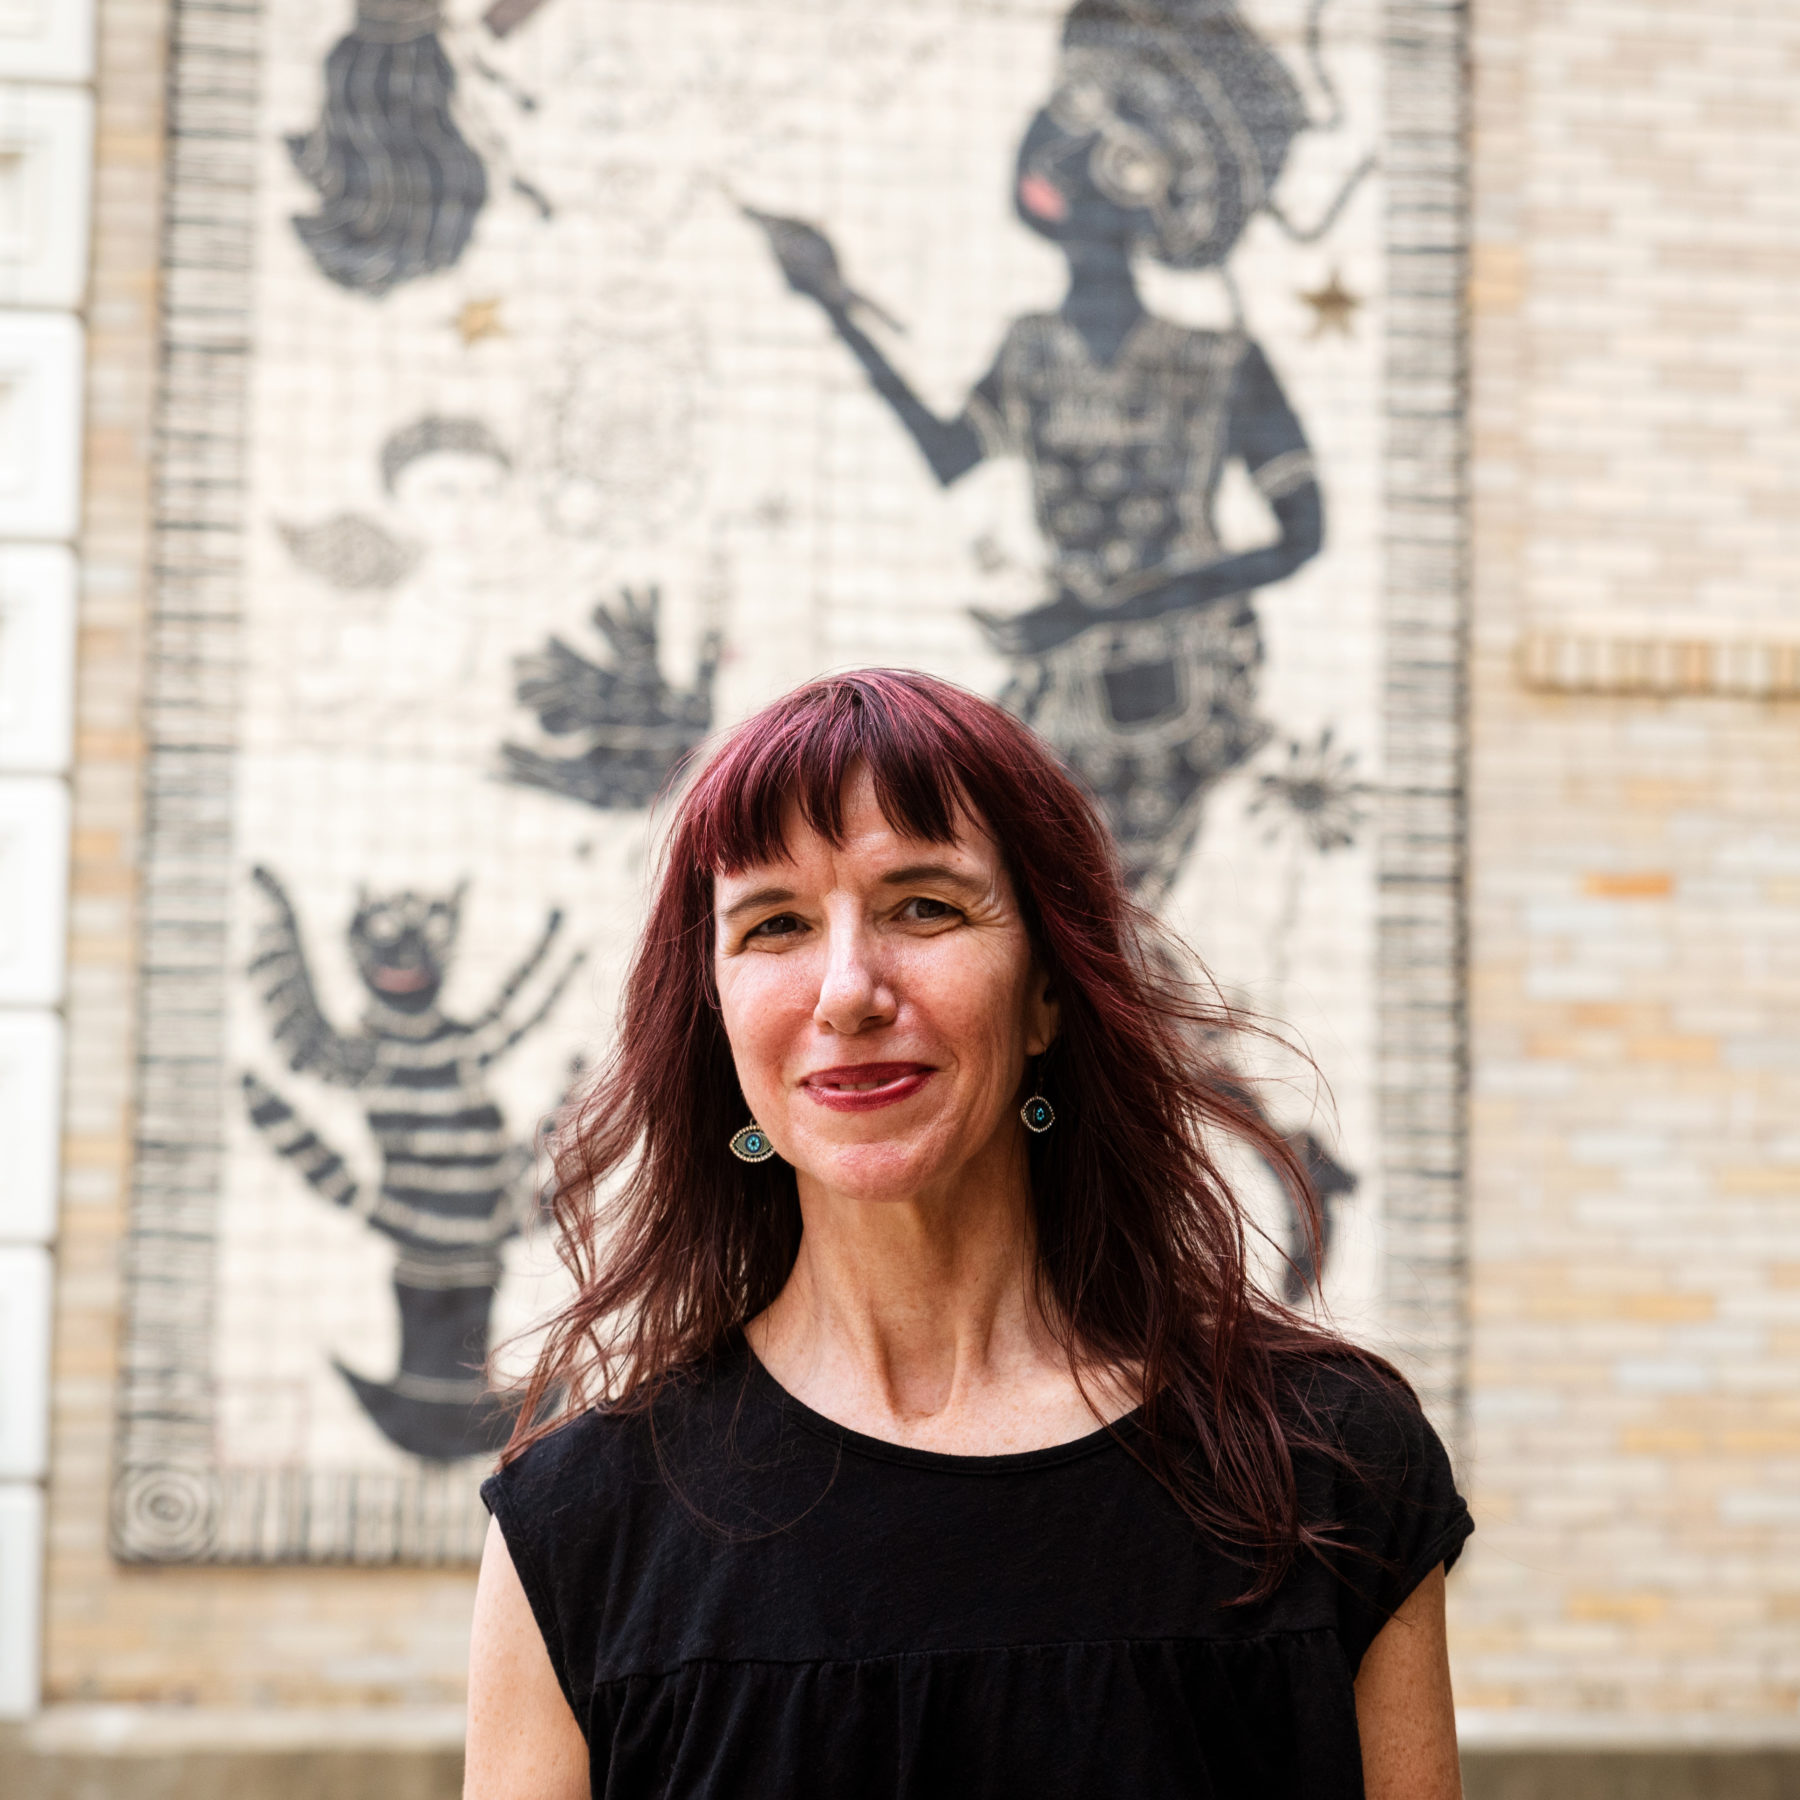 Artist stands in front of tile mural installed on a brick wall.